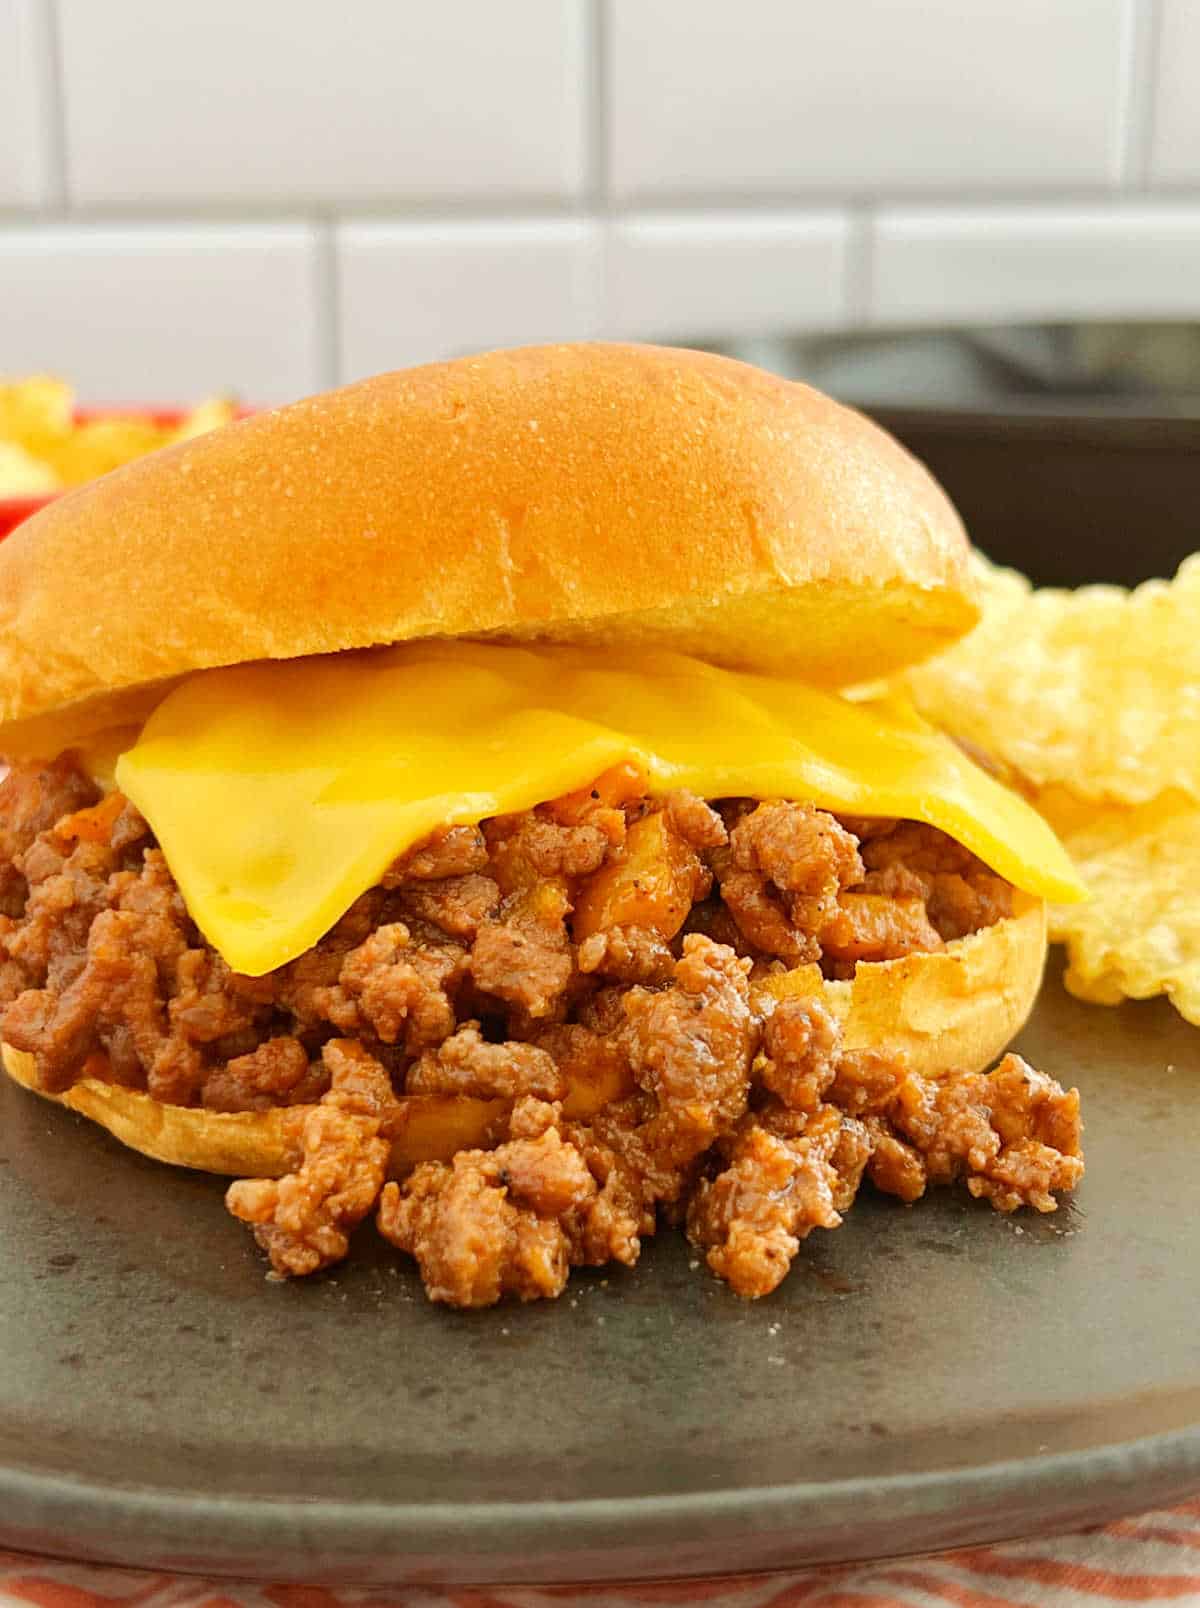 old fashioned sloppy joe sandwich on a plate with slice of cheese.